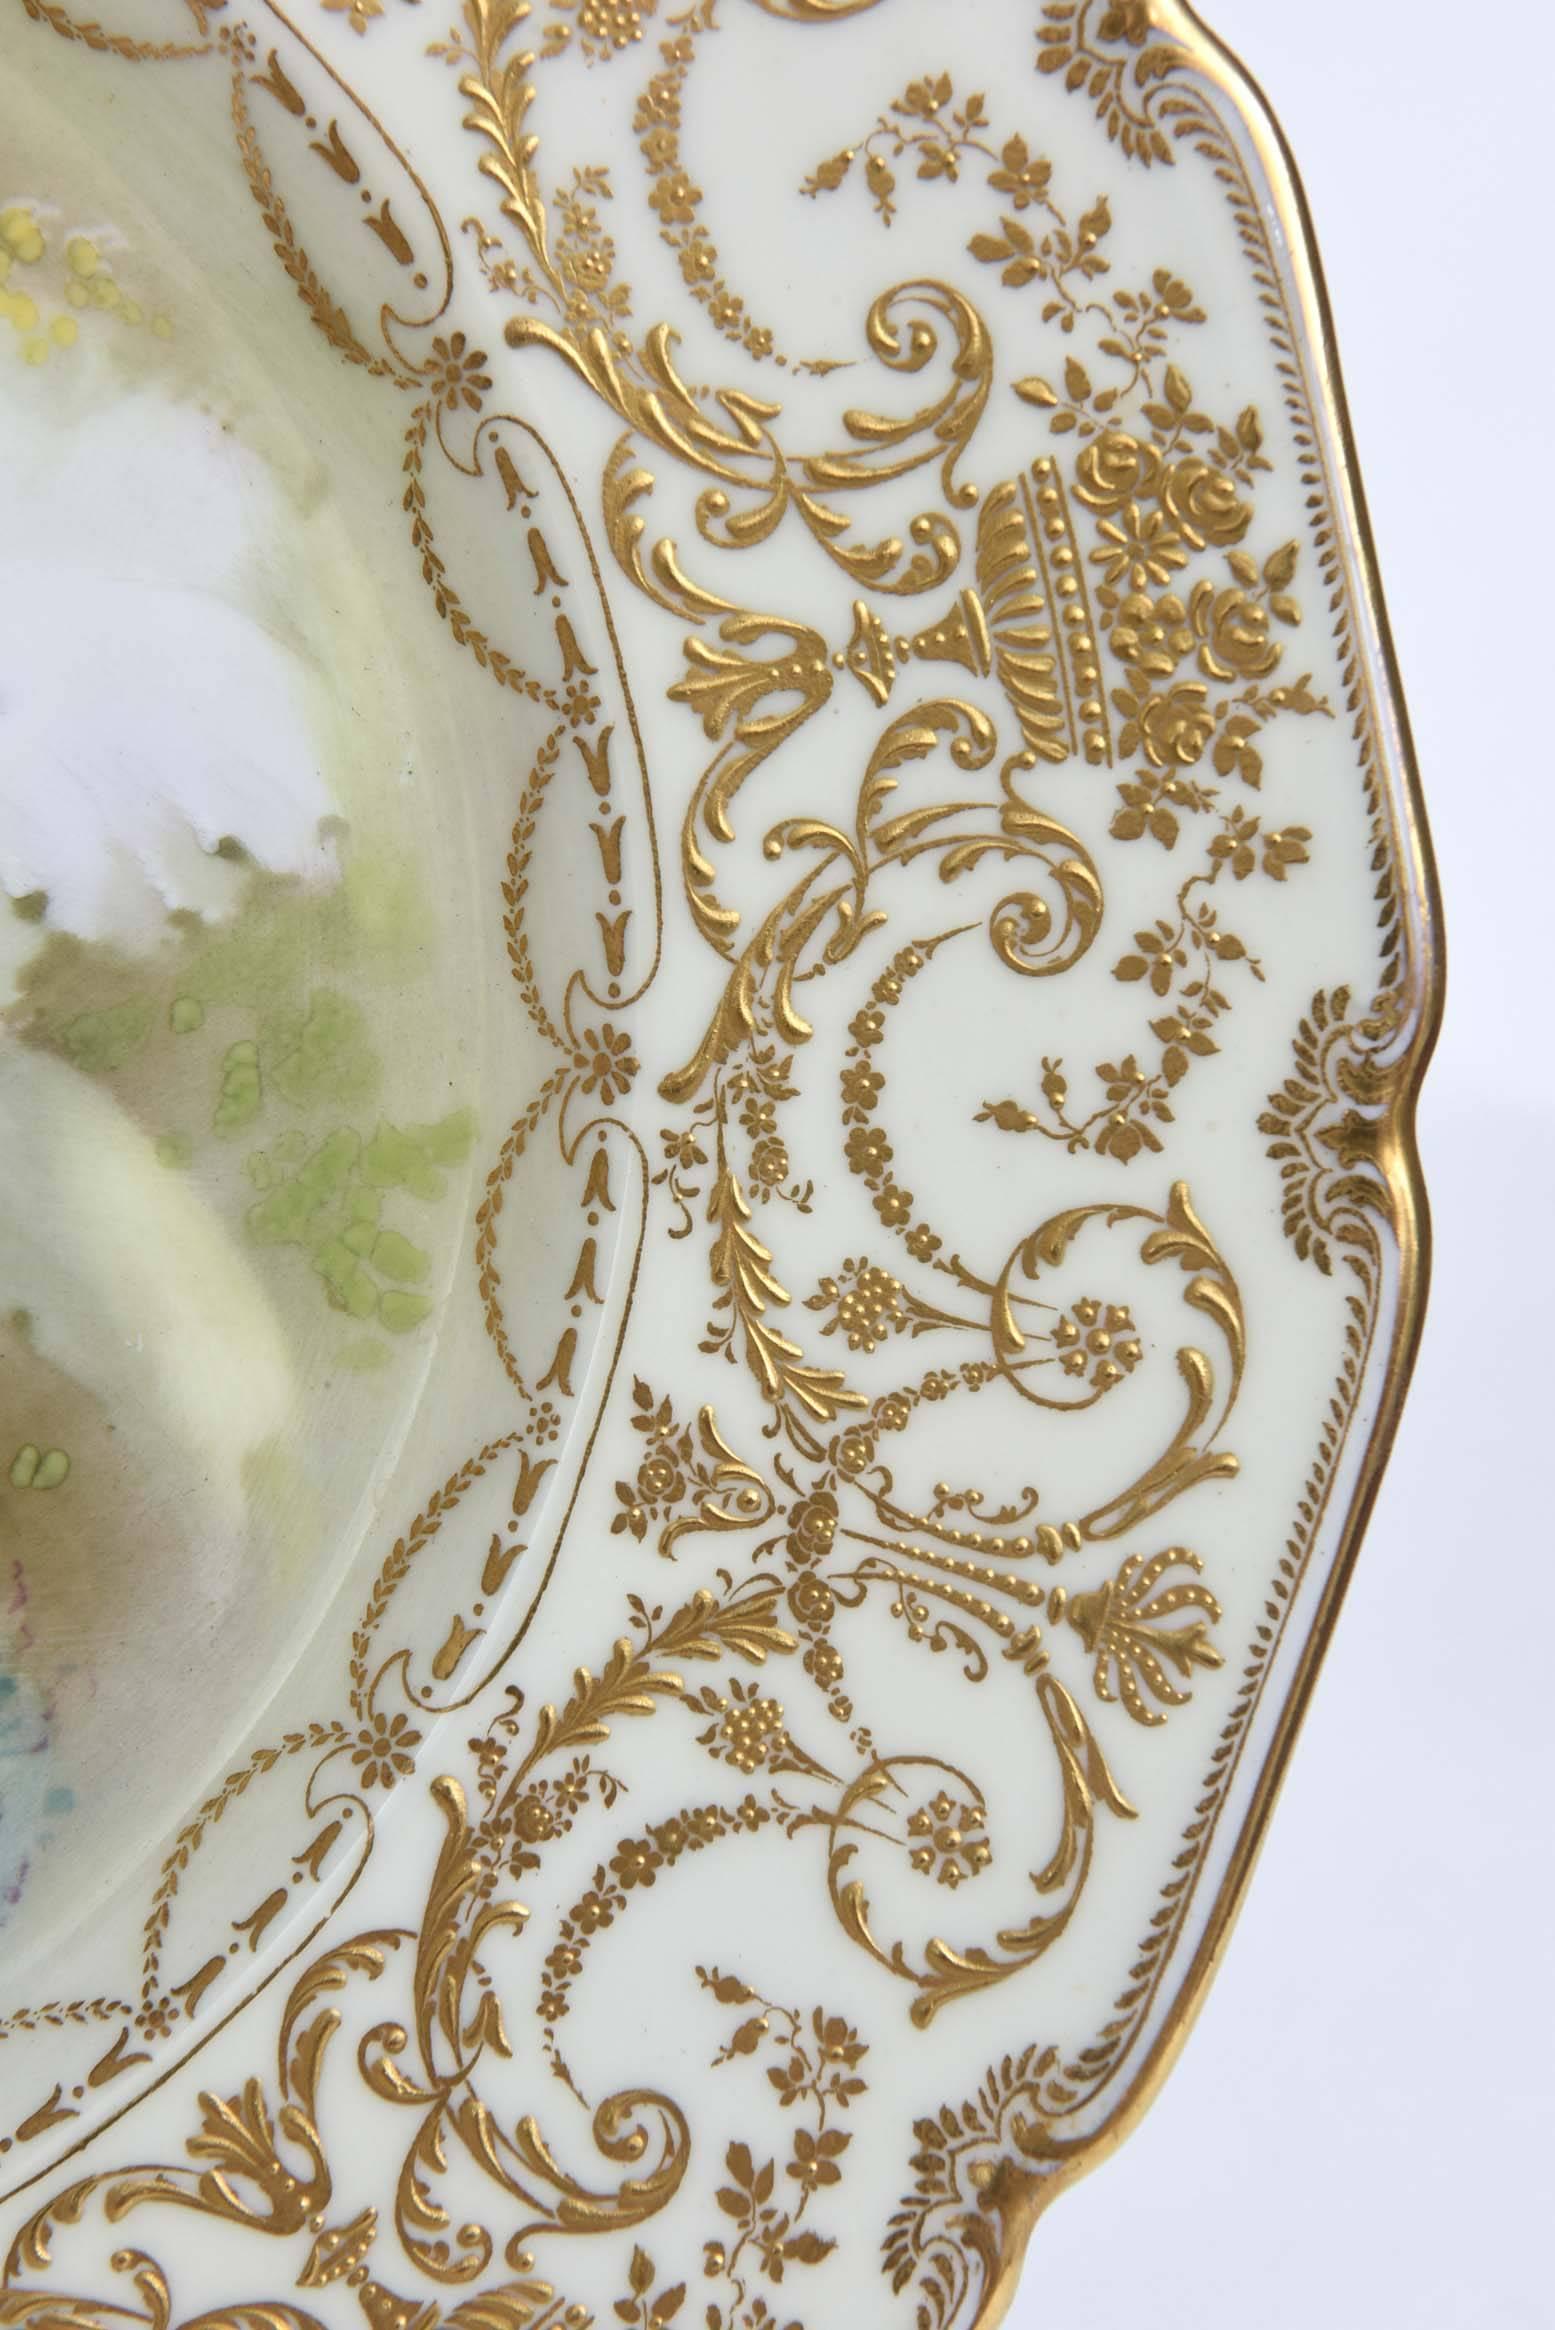 Magnificent Set of 12 Orchid Presentation Plates, Ornate and Elaborately Gilded For Sale 1